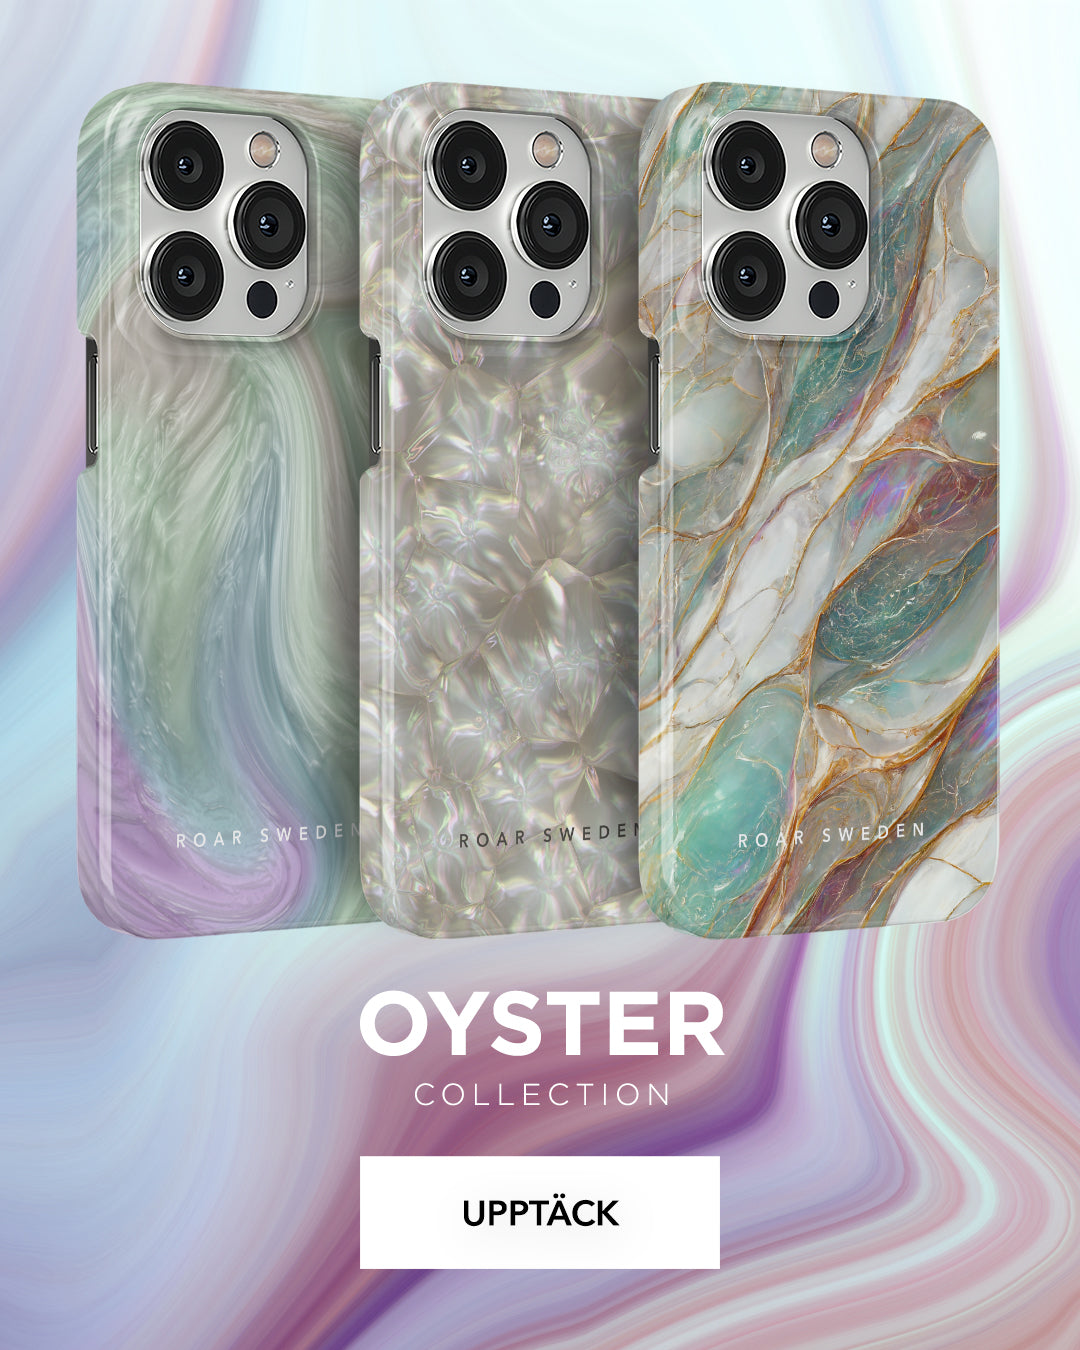 Three smartphones with decorative cases from the "oyster collection" by roar sweden, each featuring unique, swirling pastel designs on a colorful background.